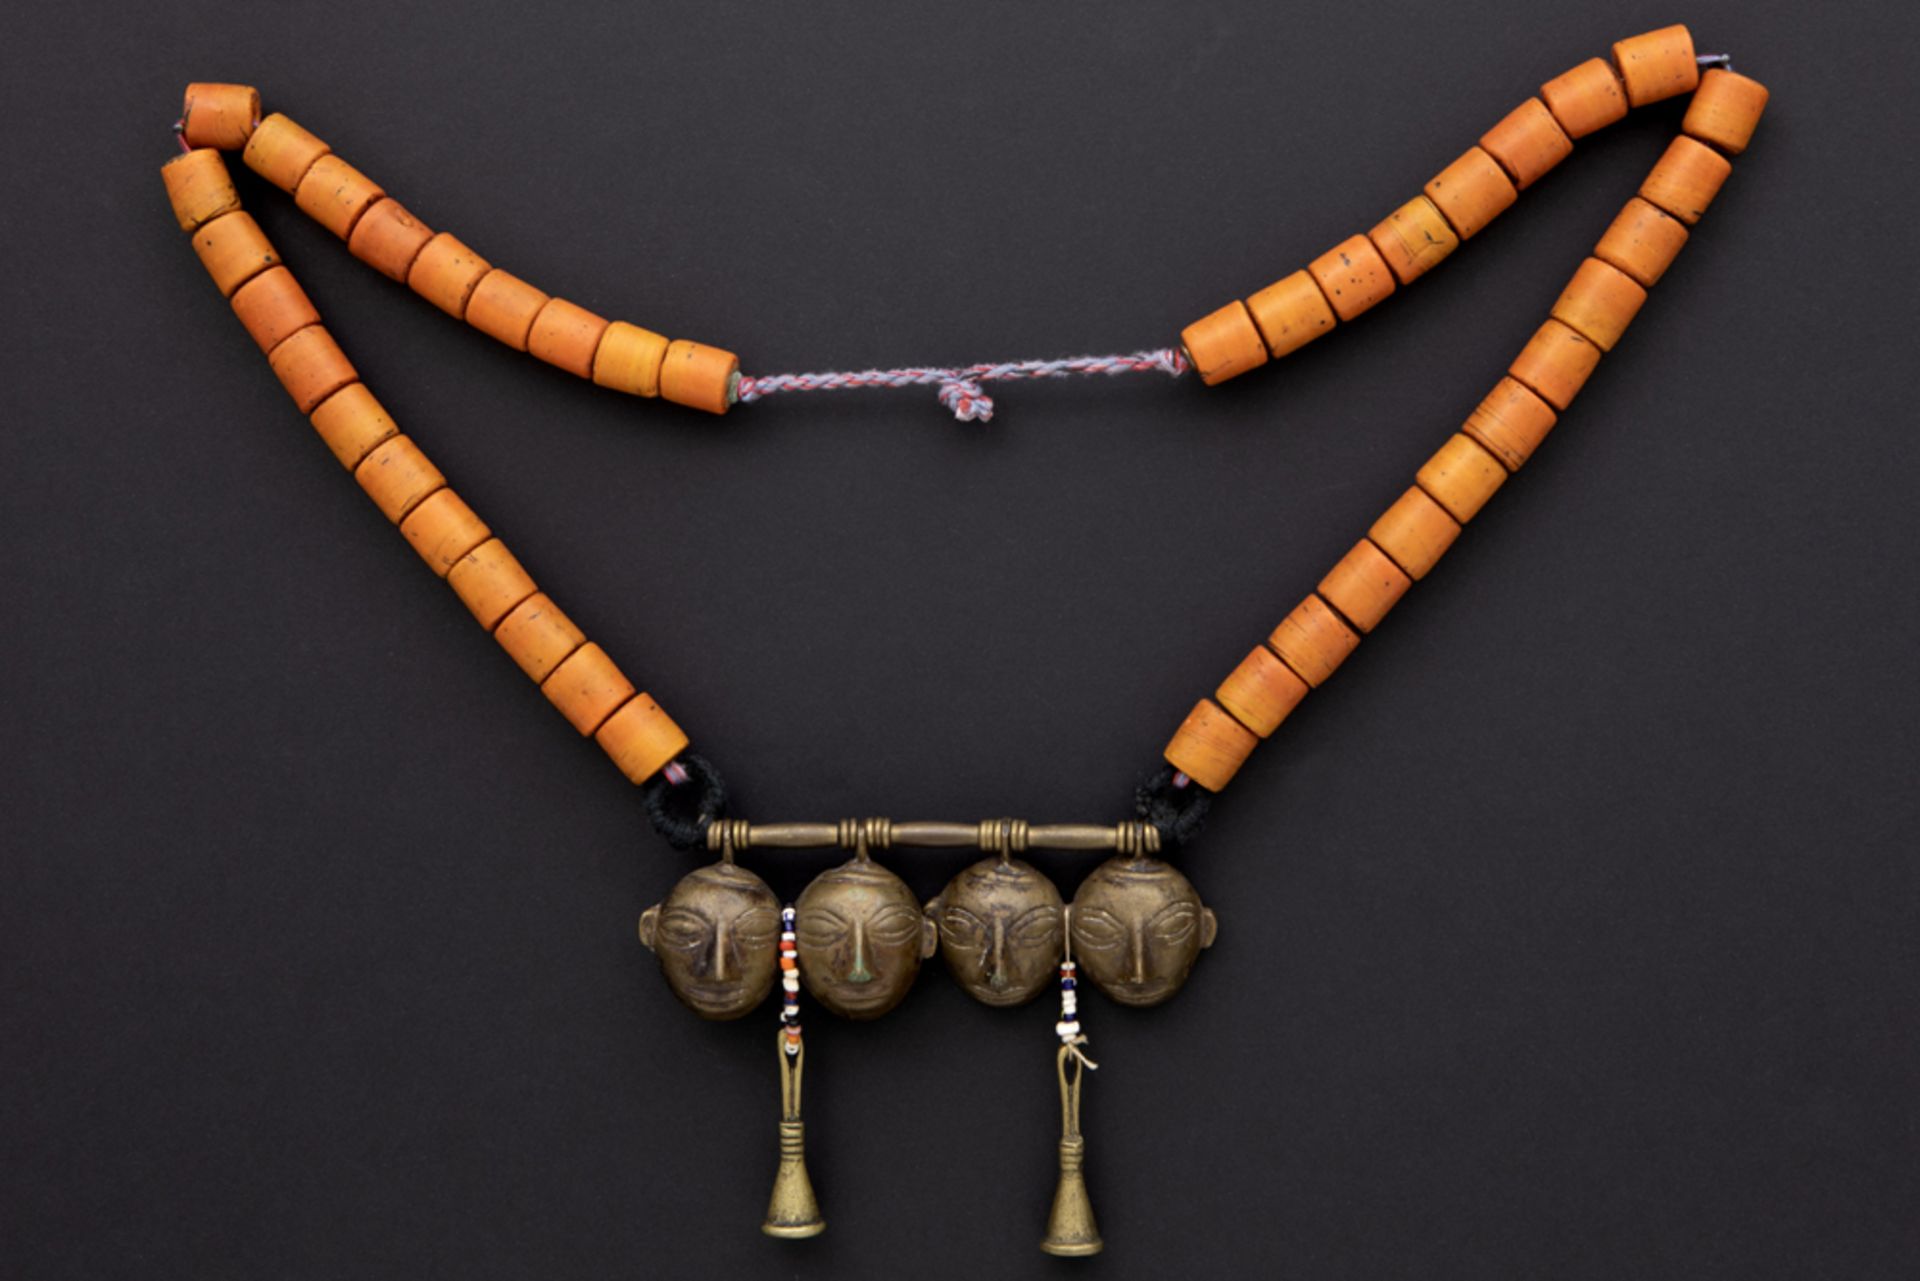 North Indian Naga necklace with beads and a wooden pendant with four bronze heads